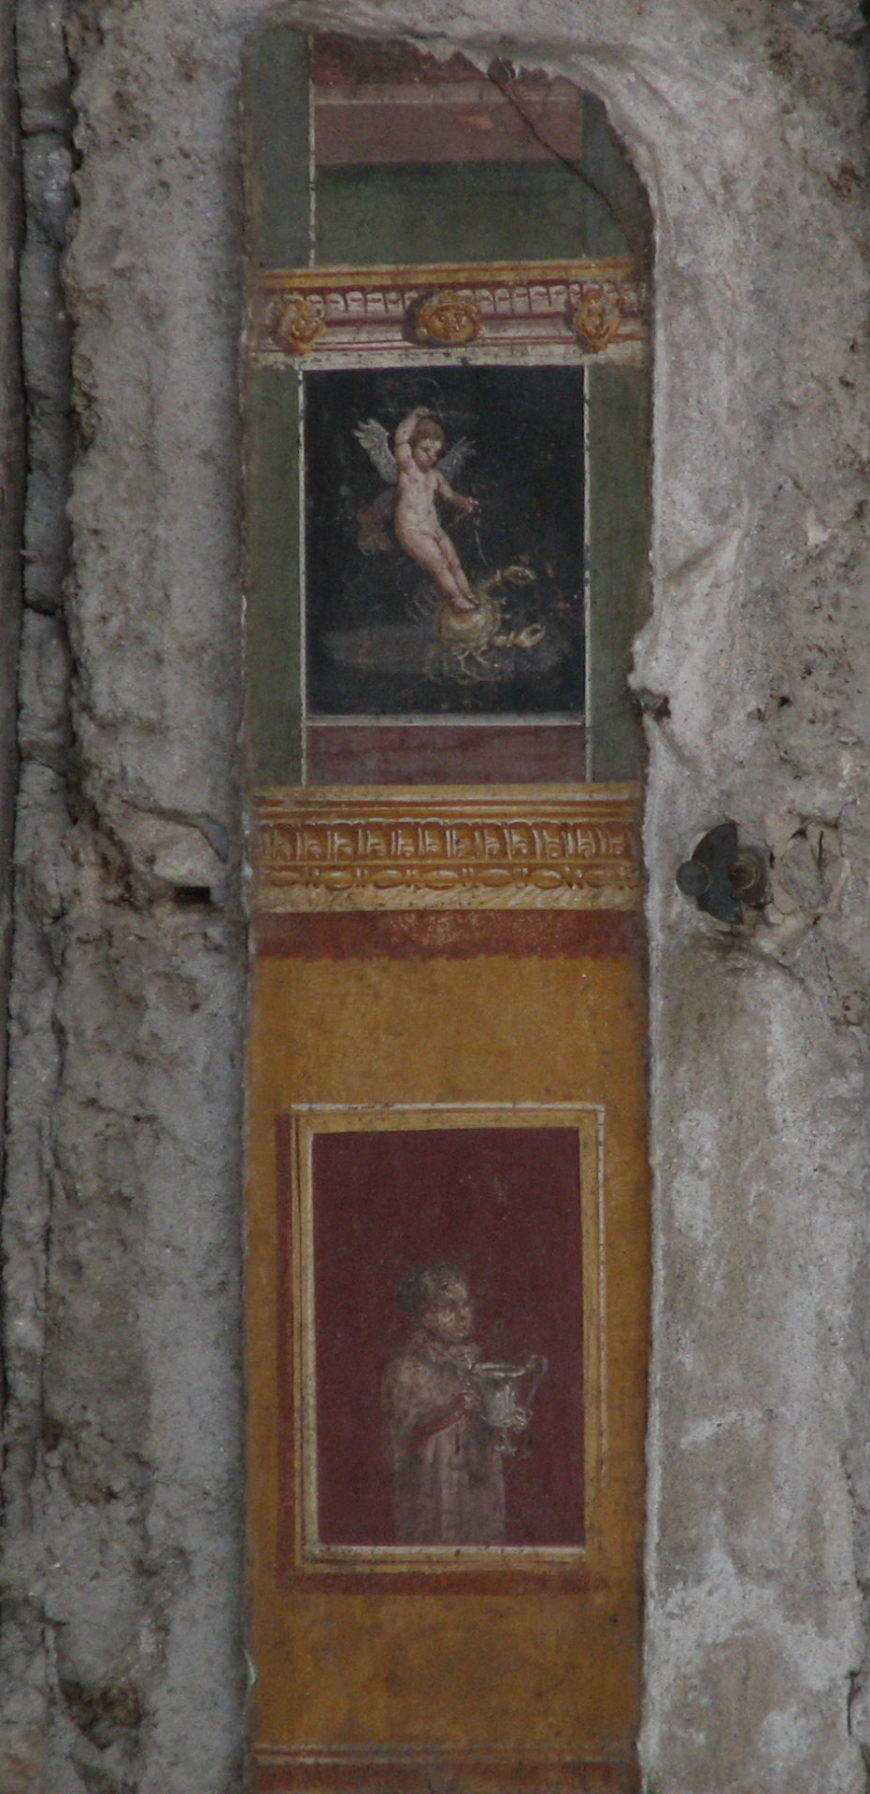 Frescoes in the atrium, House of the Vettii, Pompeii (photo: Irene Norman, CC BY-NC 2.0)